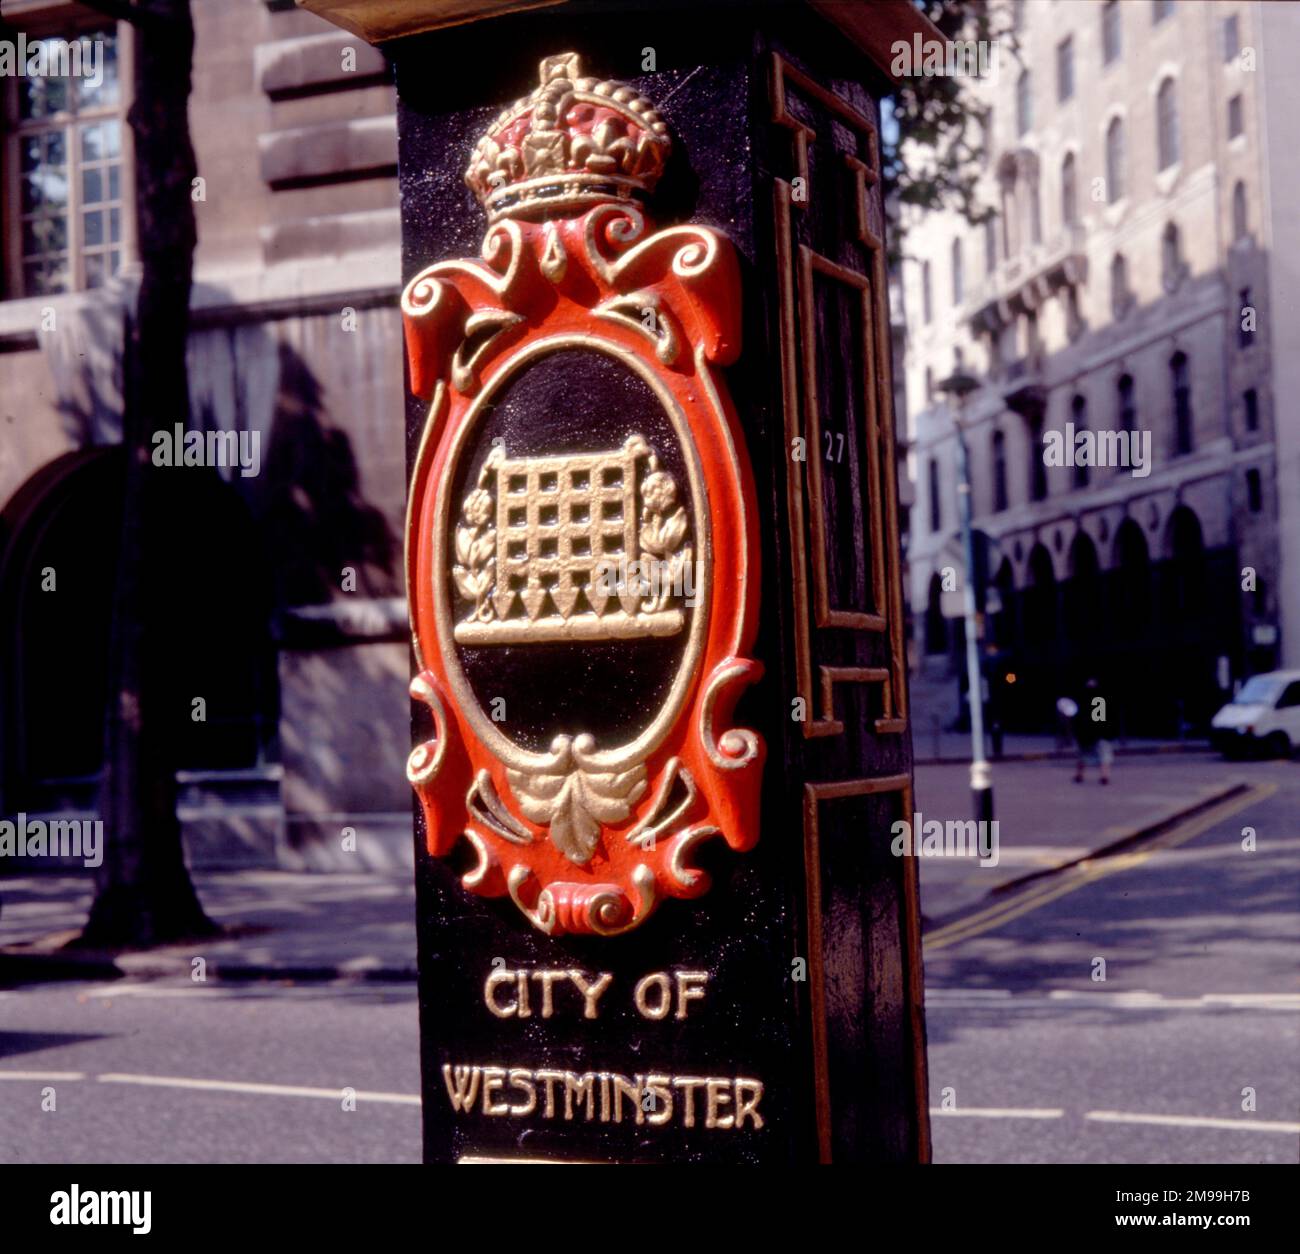 Insignia of the City of Westminster, London on a lamppost Stock Photo